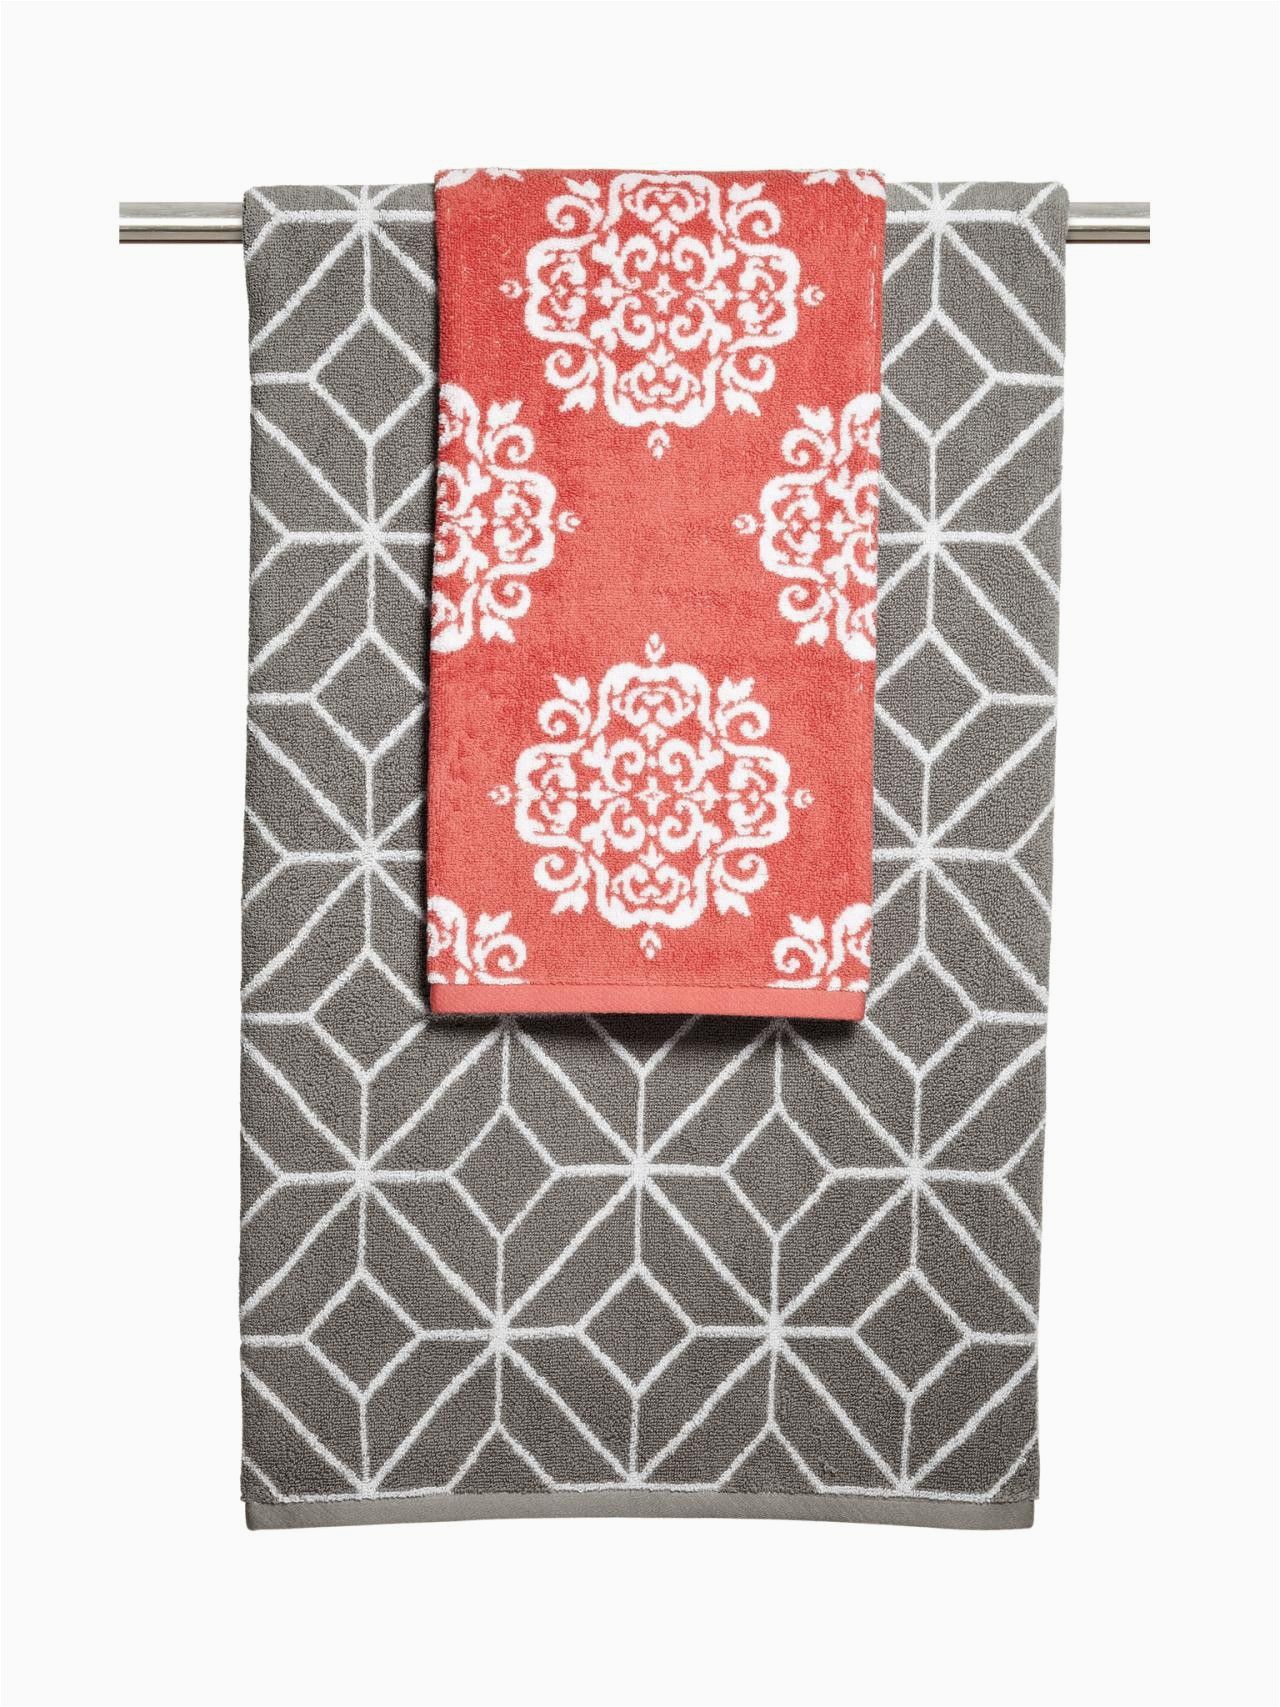 Coral Bath towels and Rugs Bathroom towel Color Binations Gray Accent towels In 2020